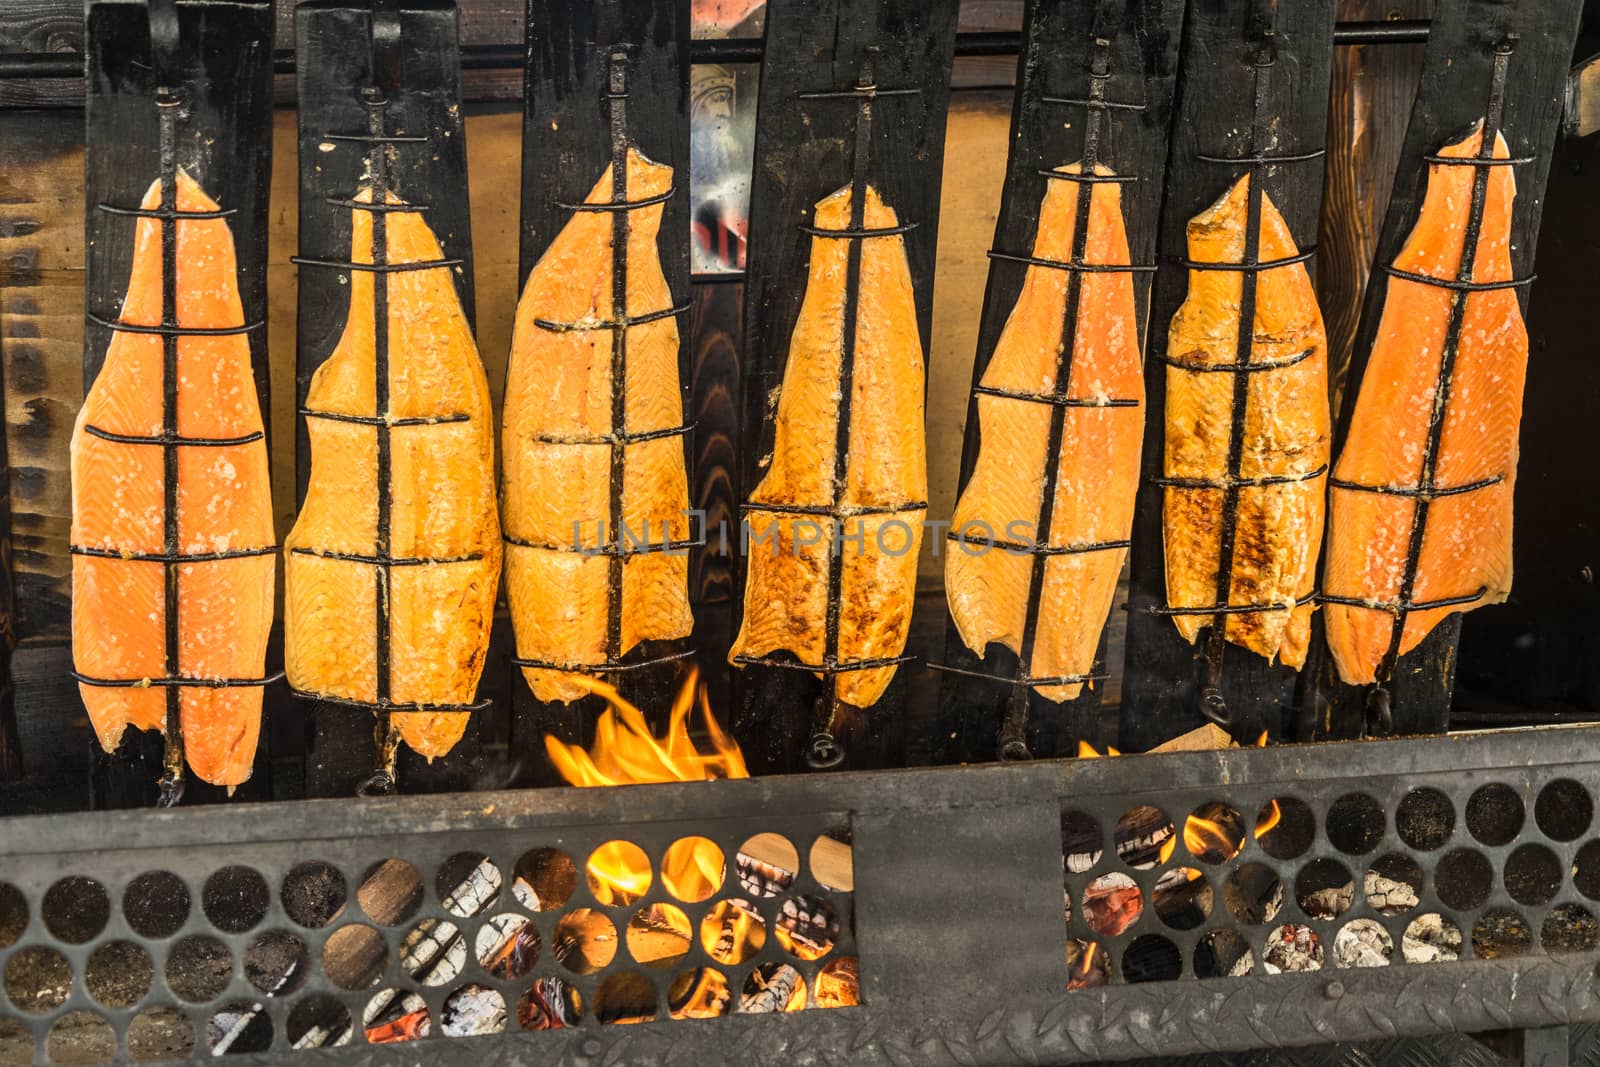 Preparation of flame salmon over the open fire of an open fireplace loaded with wood, Germany